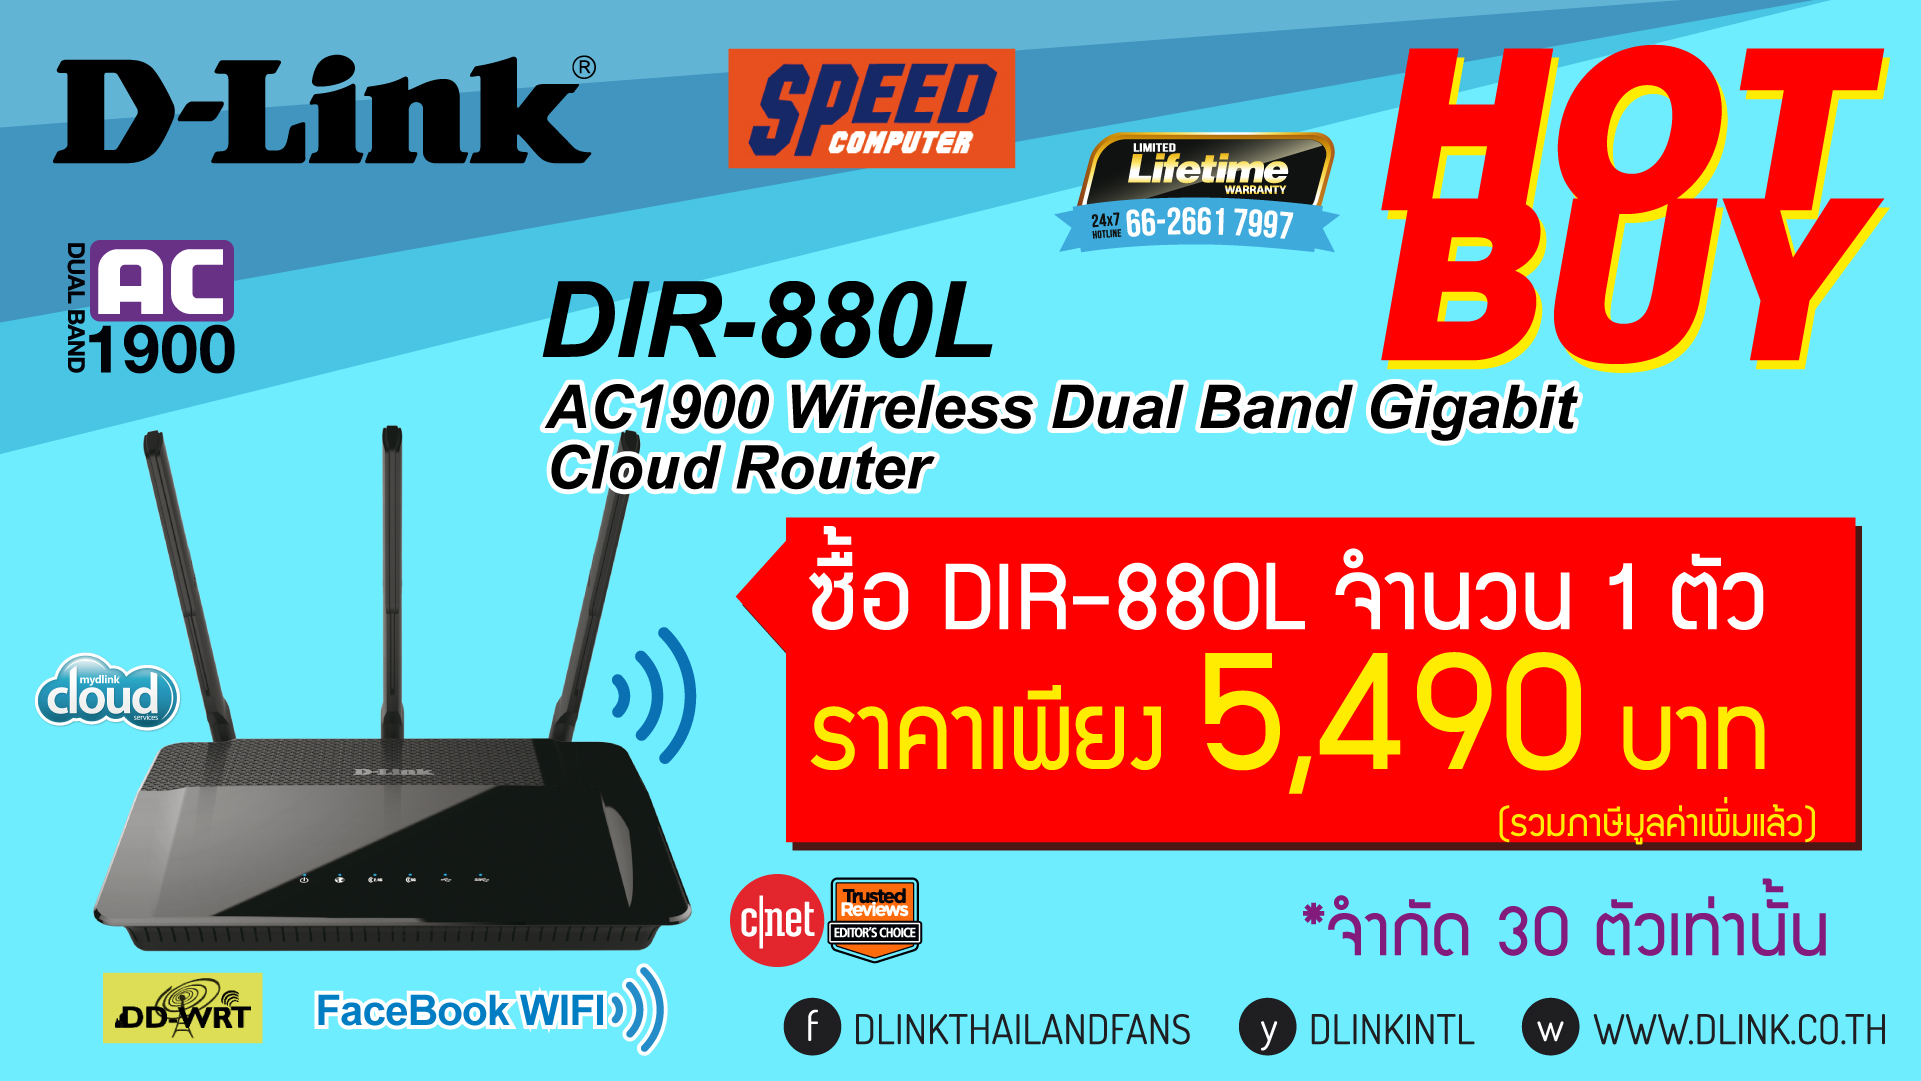 D-Link-Commart-Screen-for-Speed-March-16-09